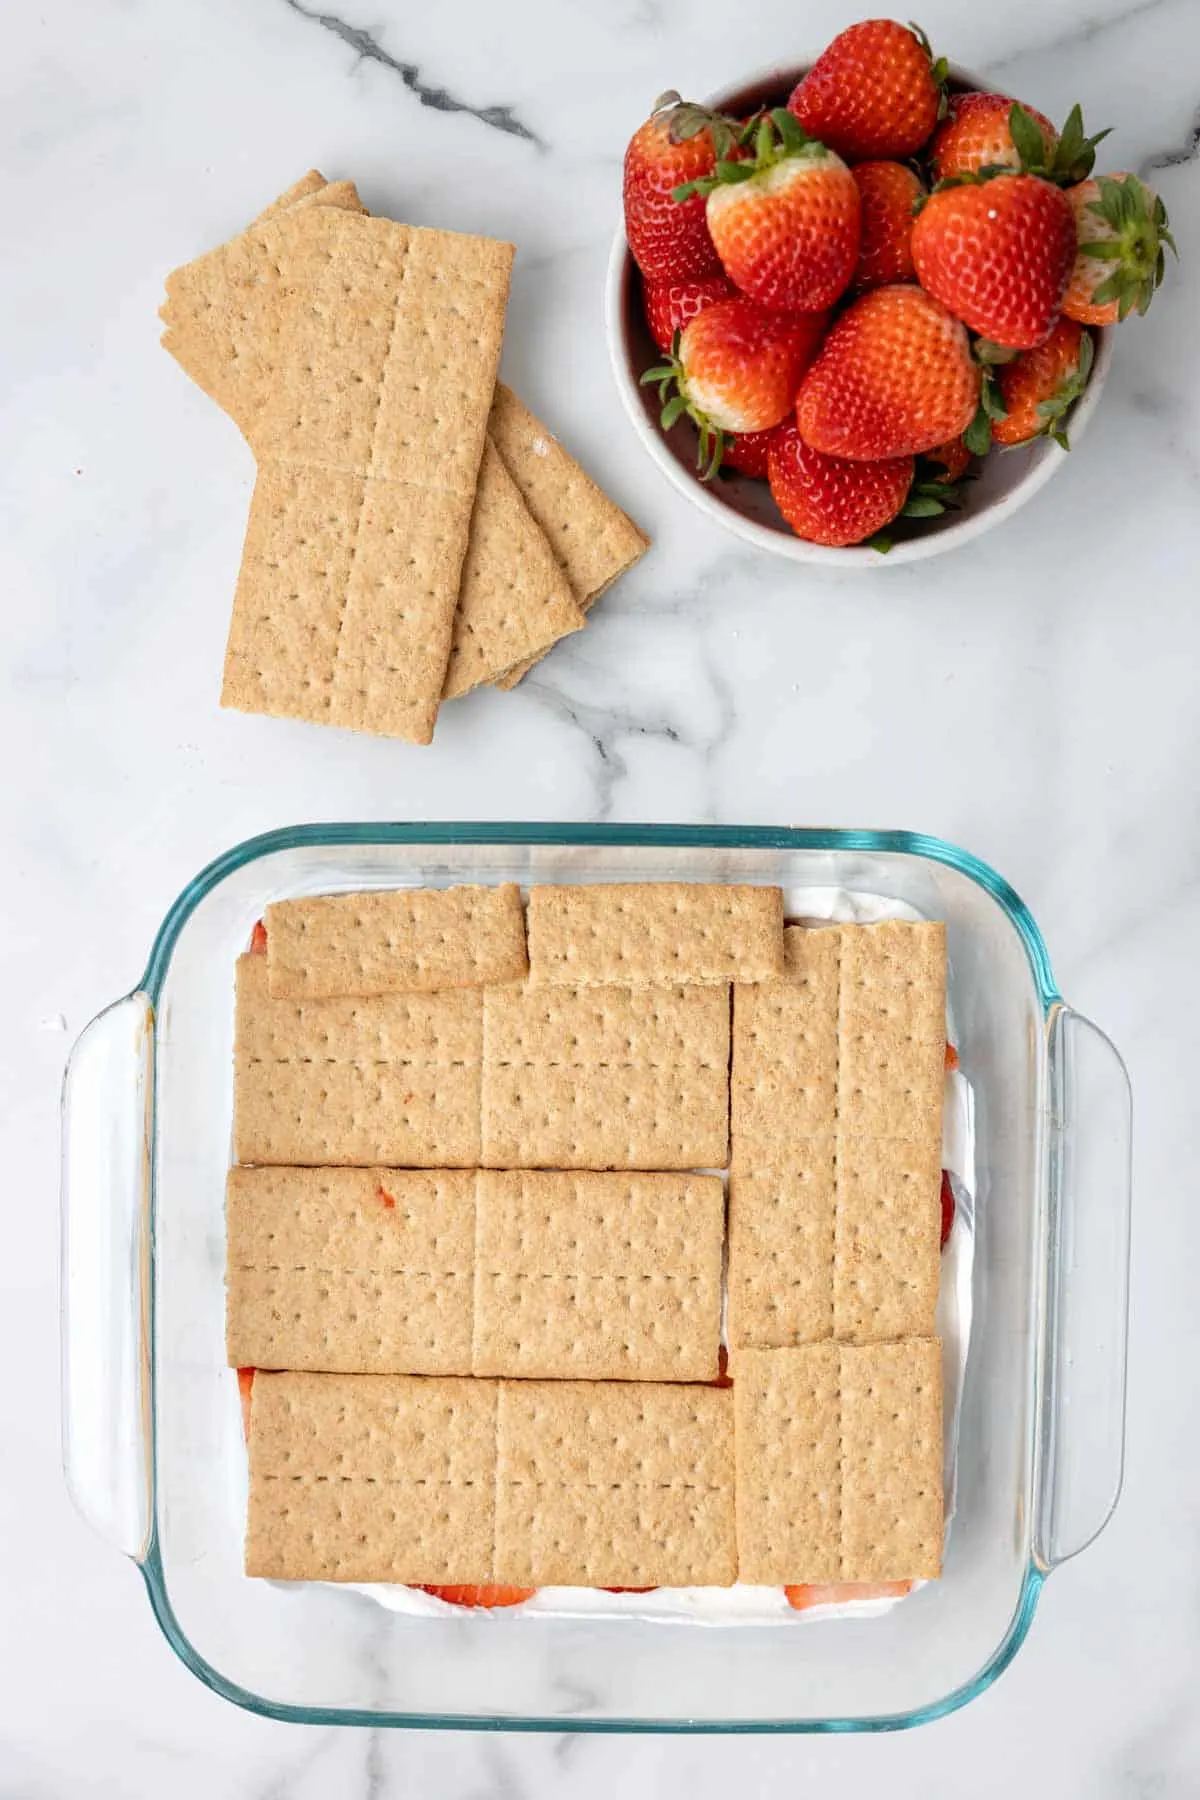 graham crackers in a layer on top of strawberries and cool whip